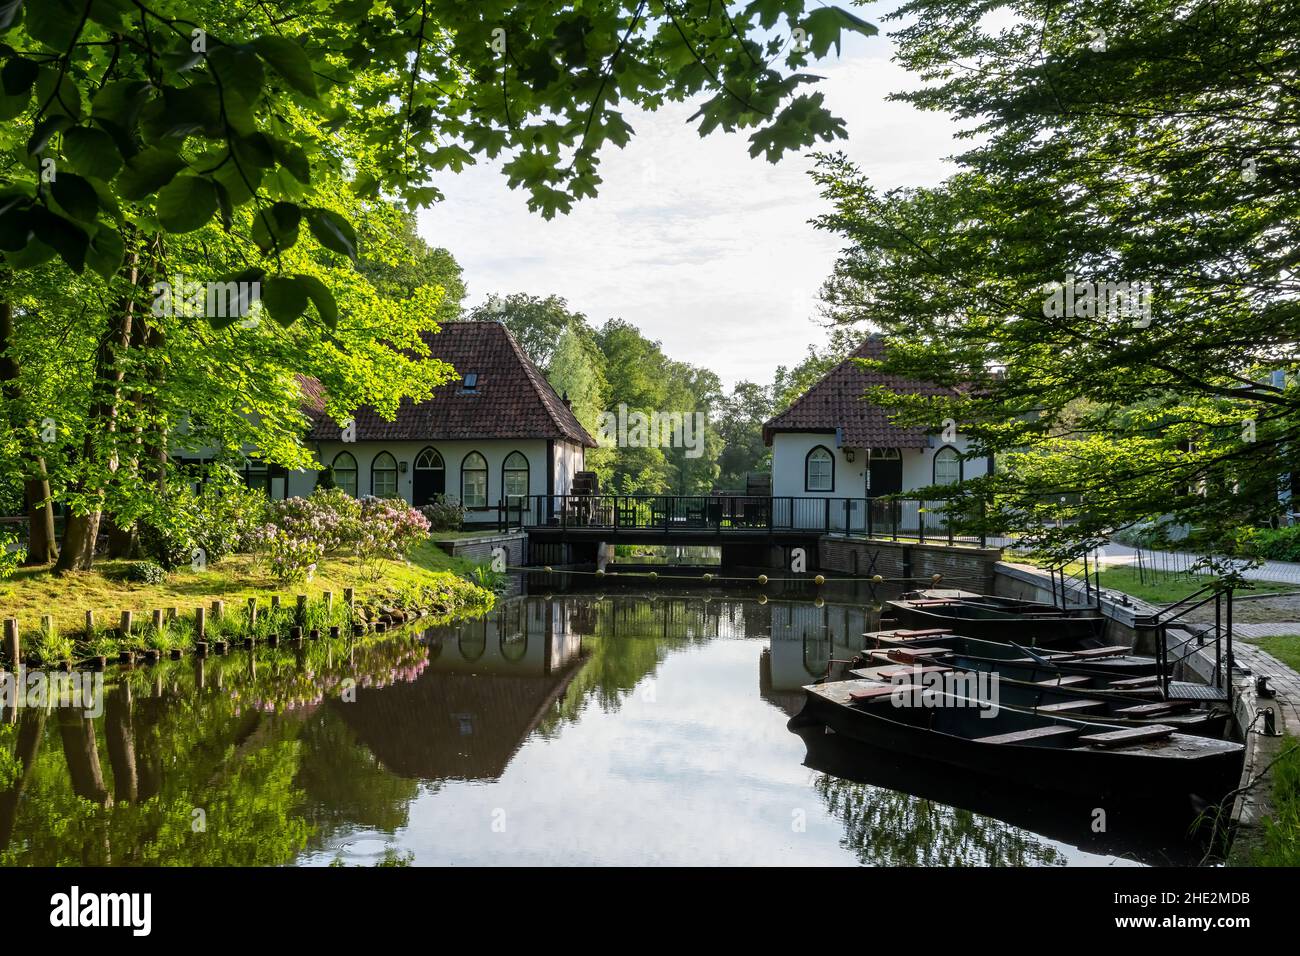 Close-up of the historic watermill Den Helder with rowing boats Stock Photo